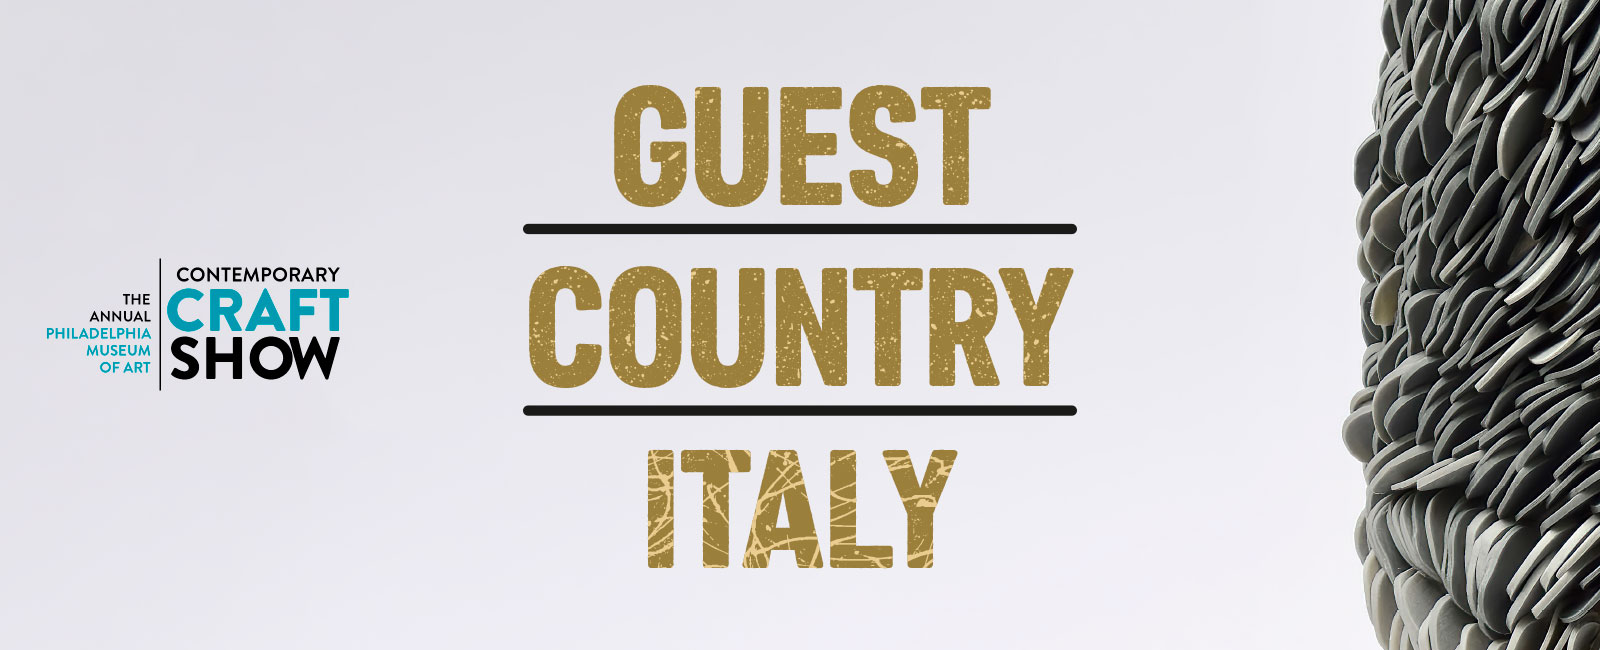 guest country italy pma craft show artist collective